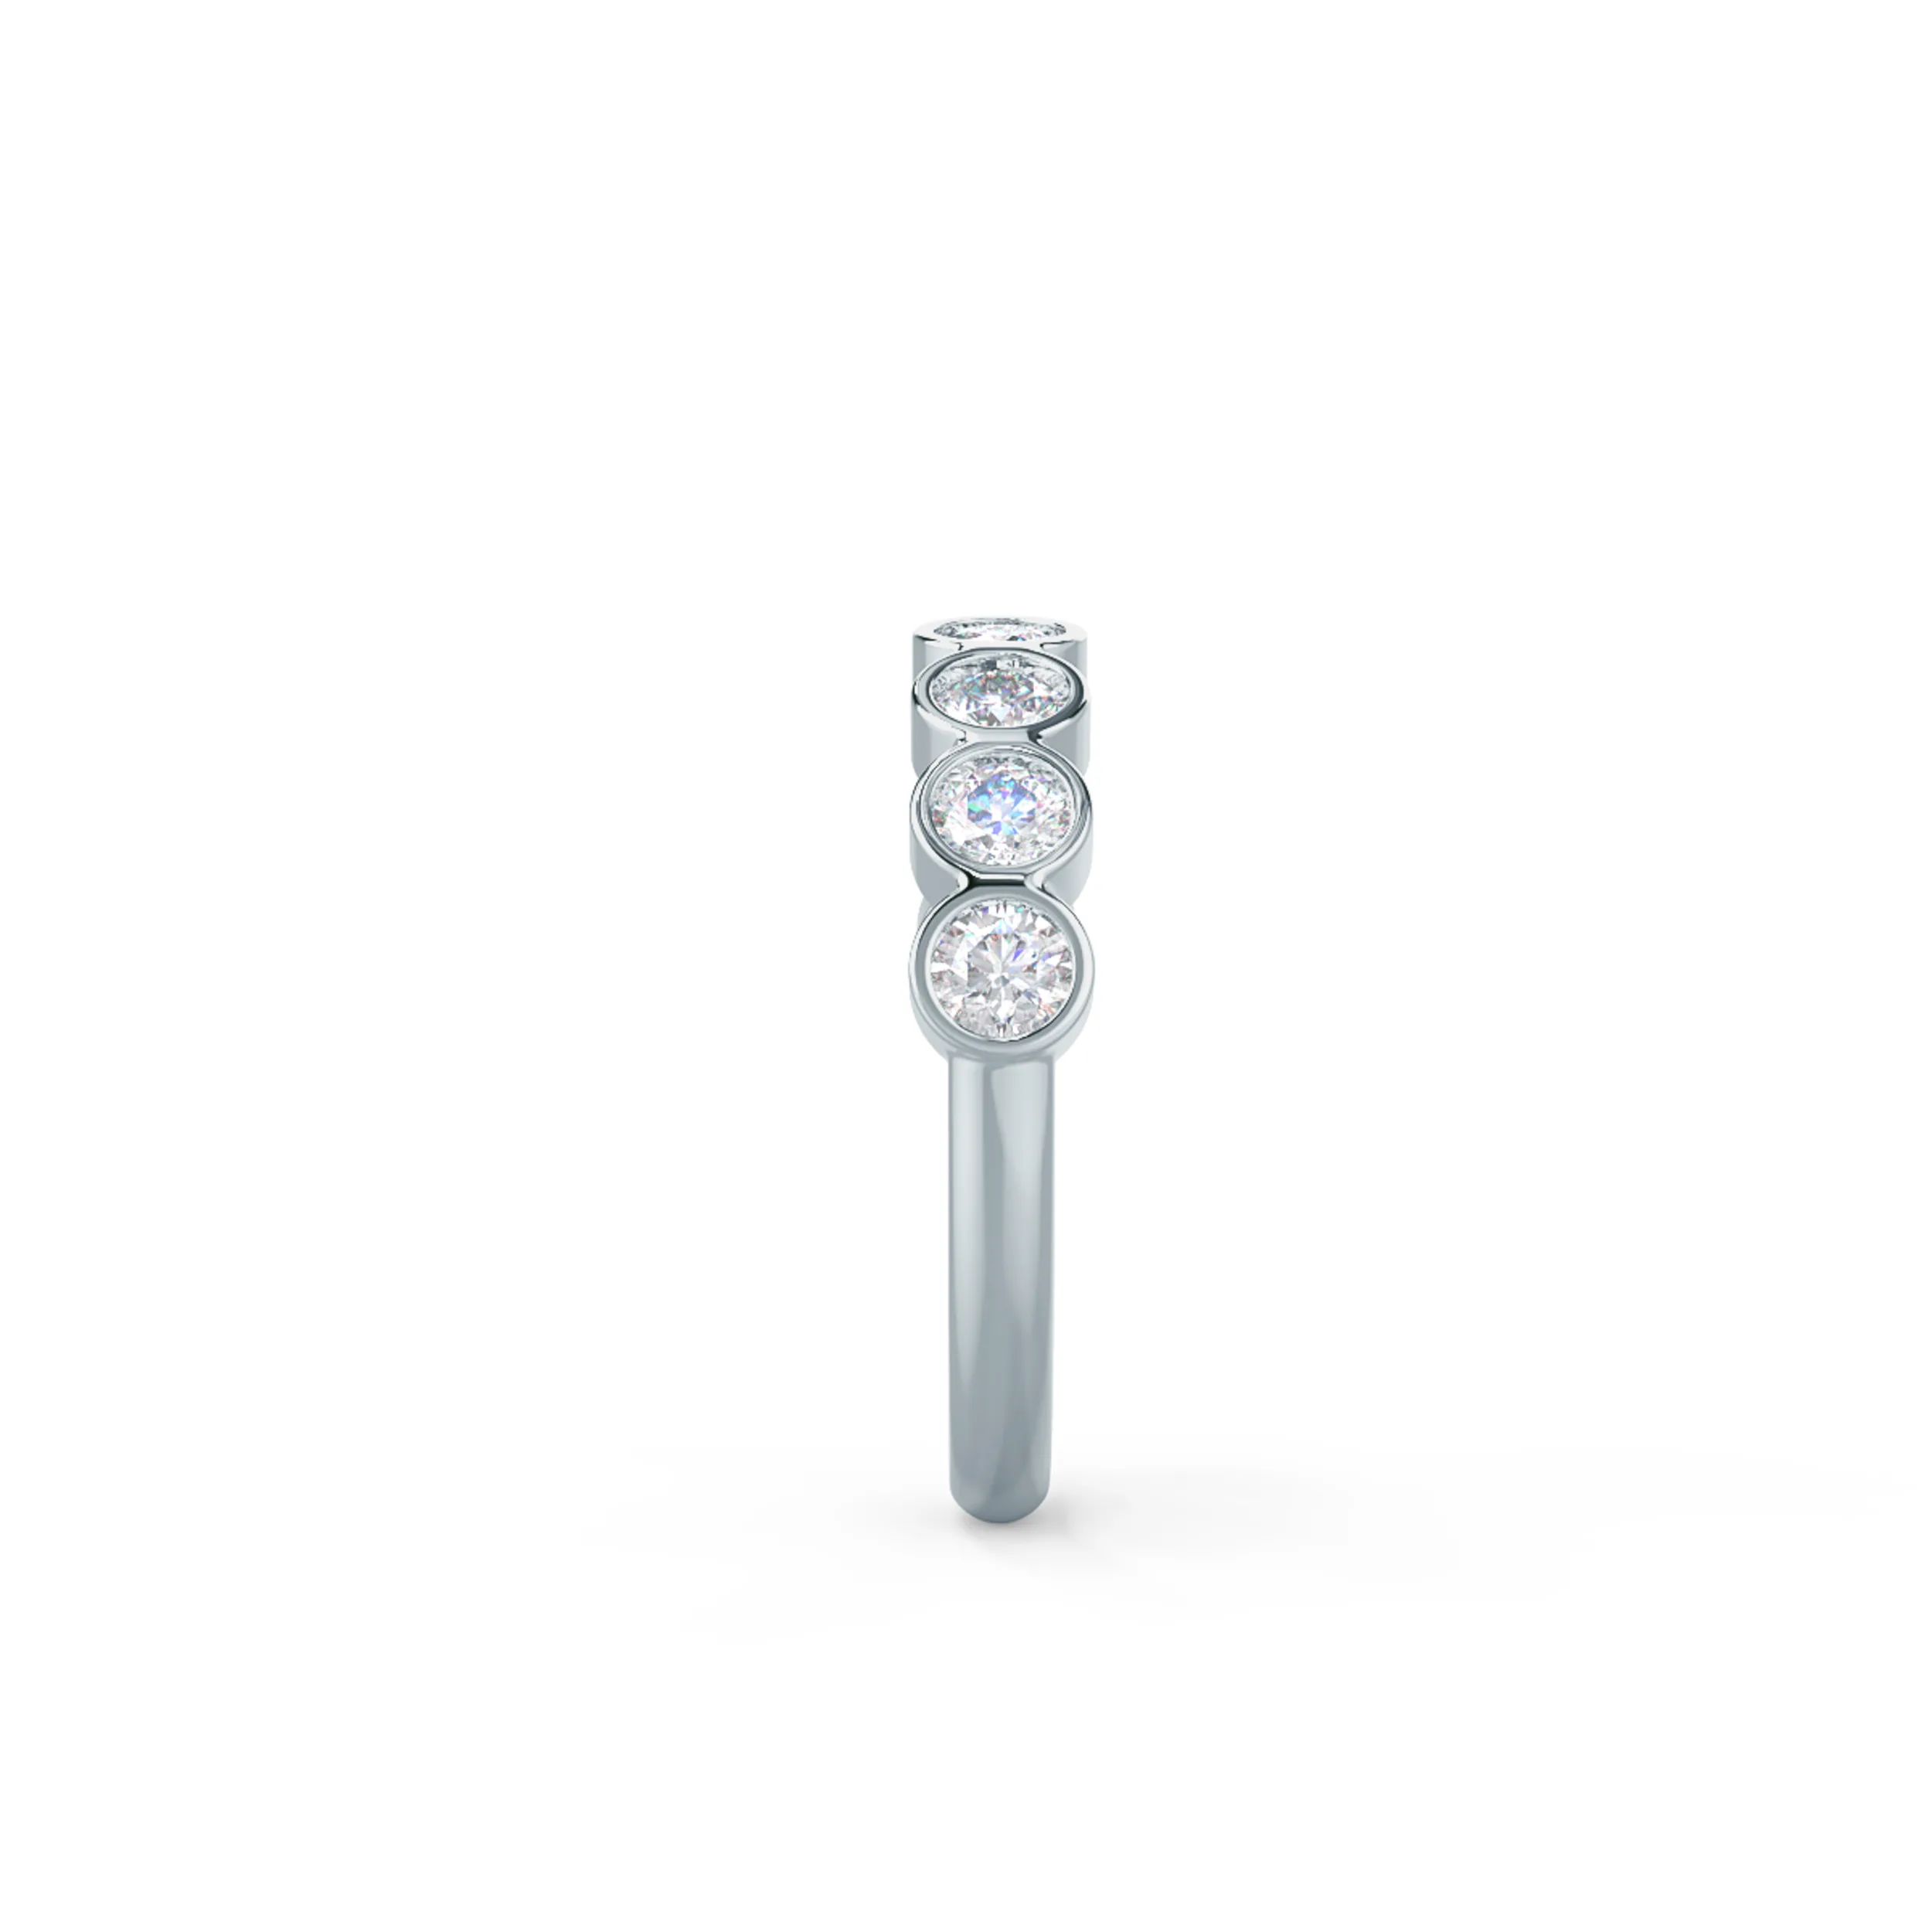 Hand Selected 0.9 Carat Round Brilliant Diamonds set in 18k White Gold Bezel Half Band (Side View)